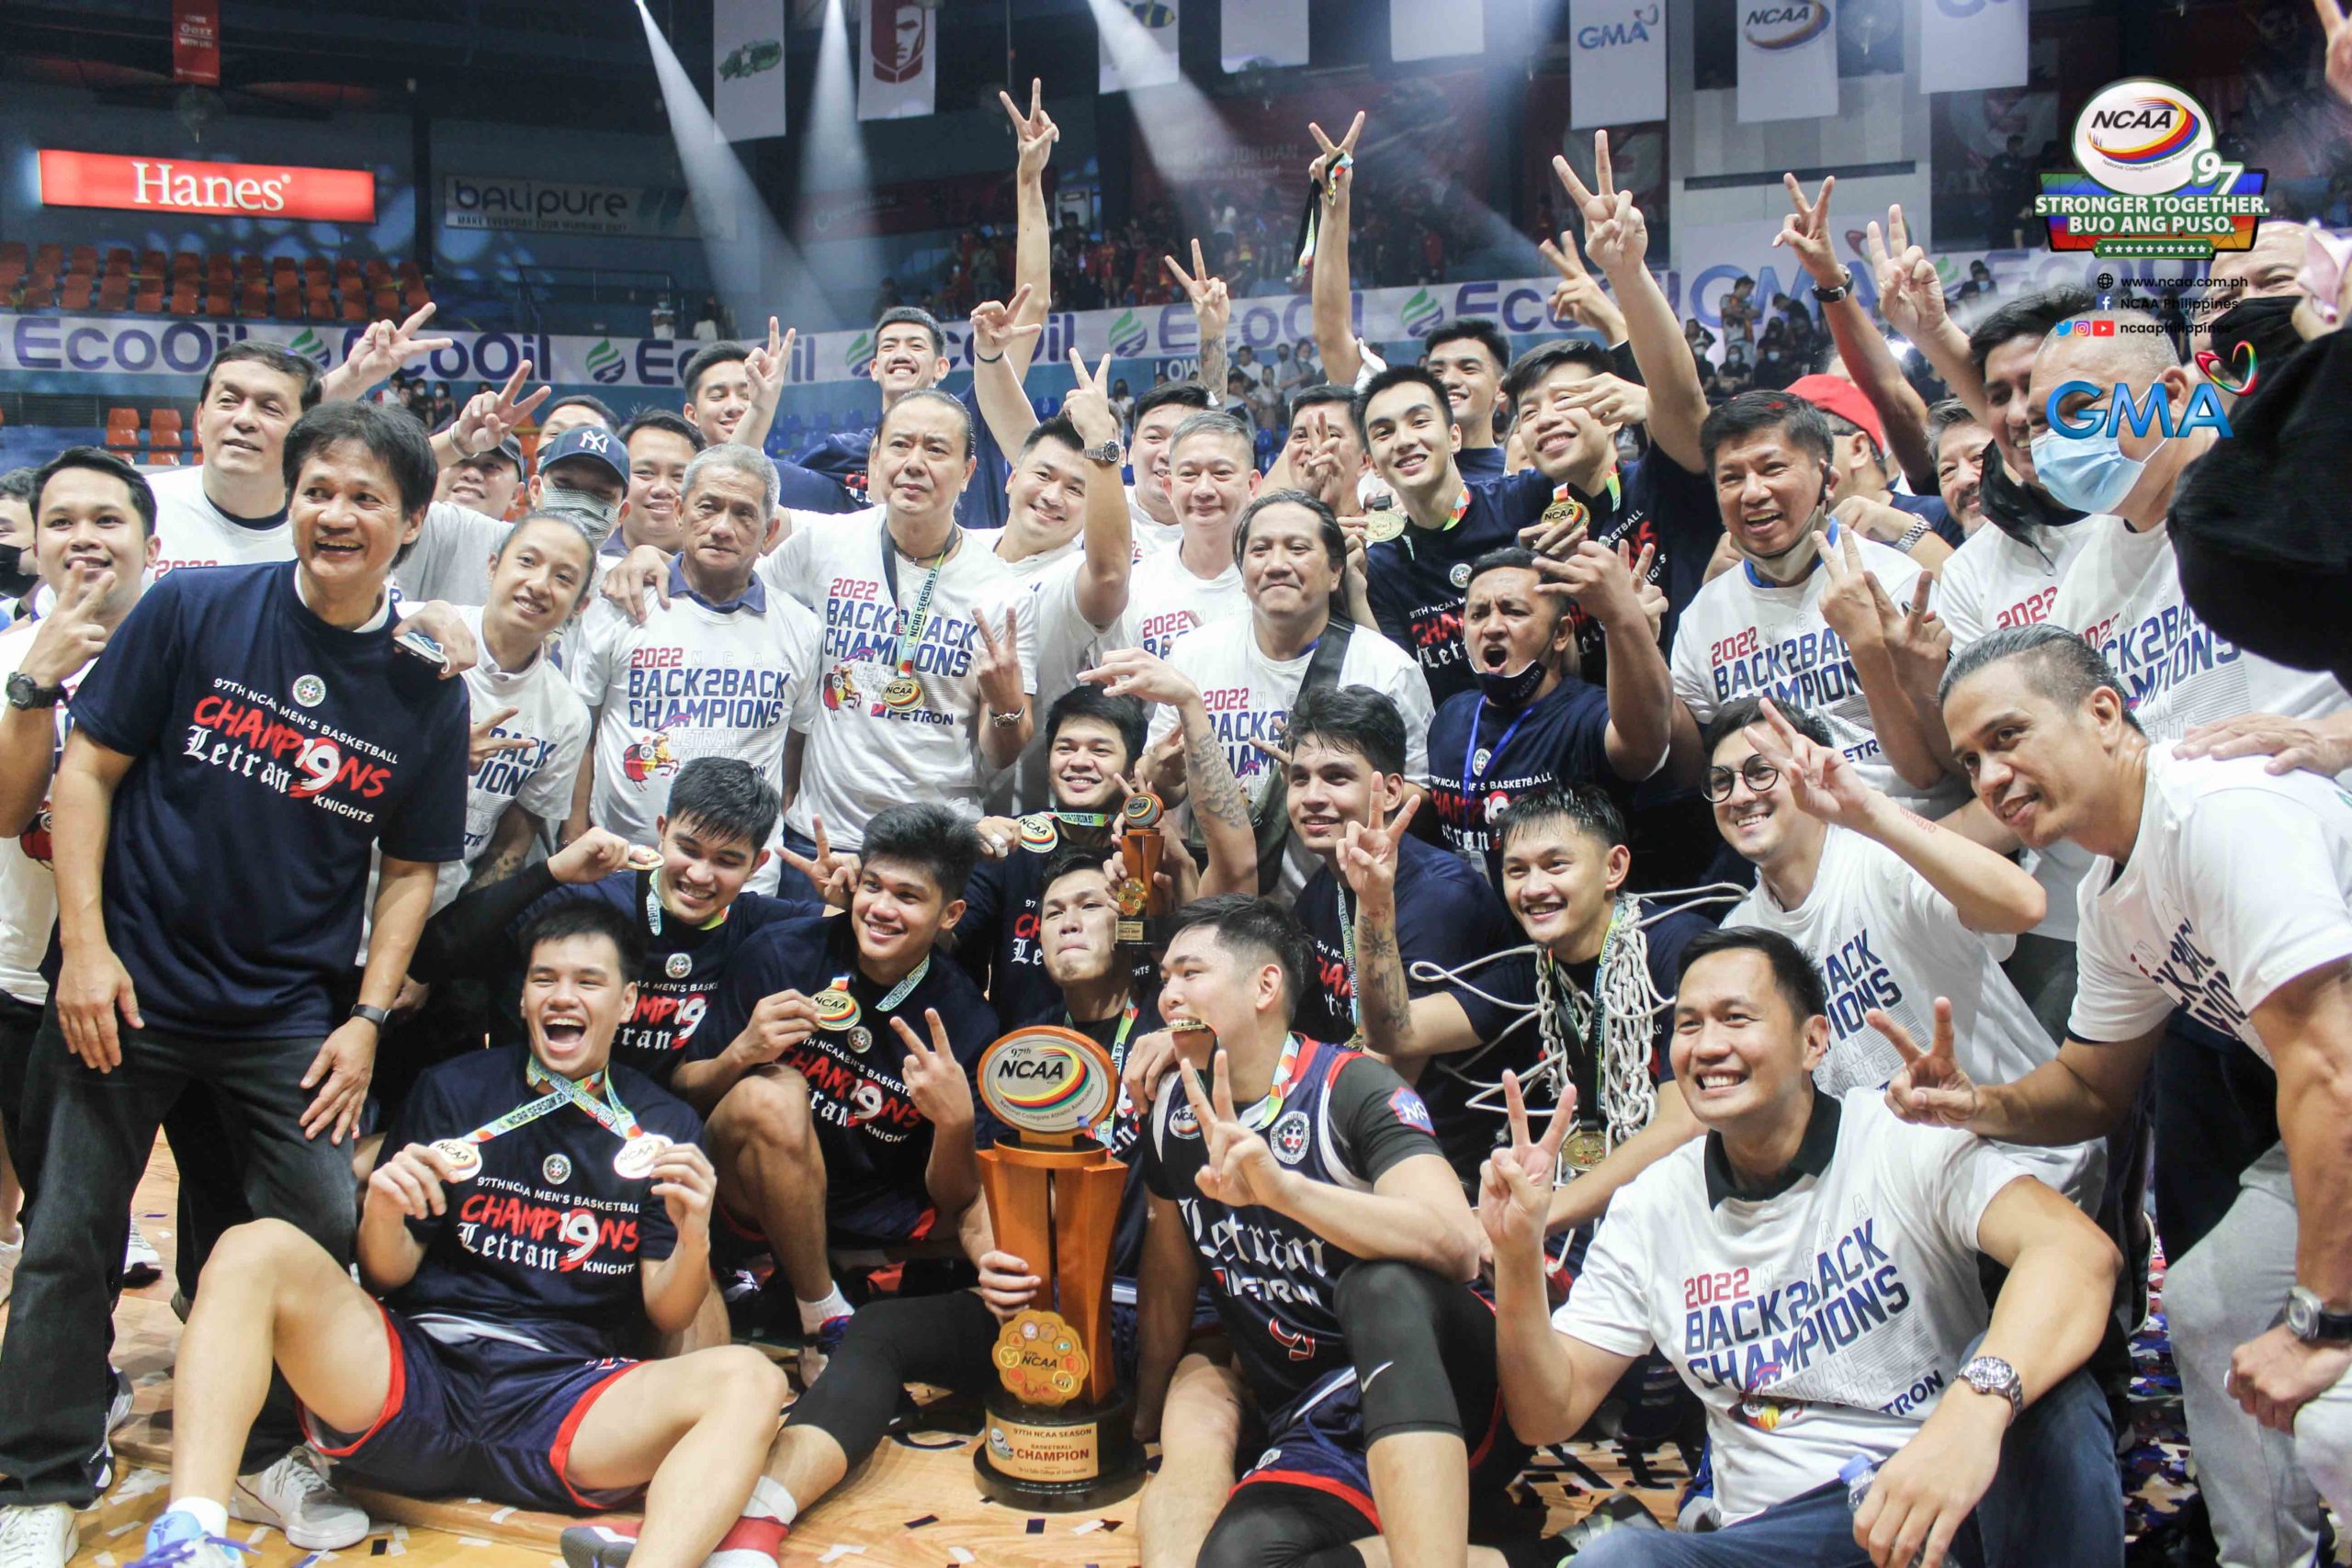 The jubilant Knights and their supporters whoop it up with the Season 97 trophy. They get another go at a title later this year. —NCAA/GMA PHOTO